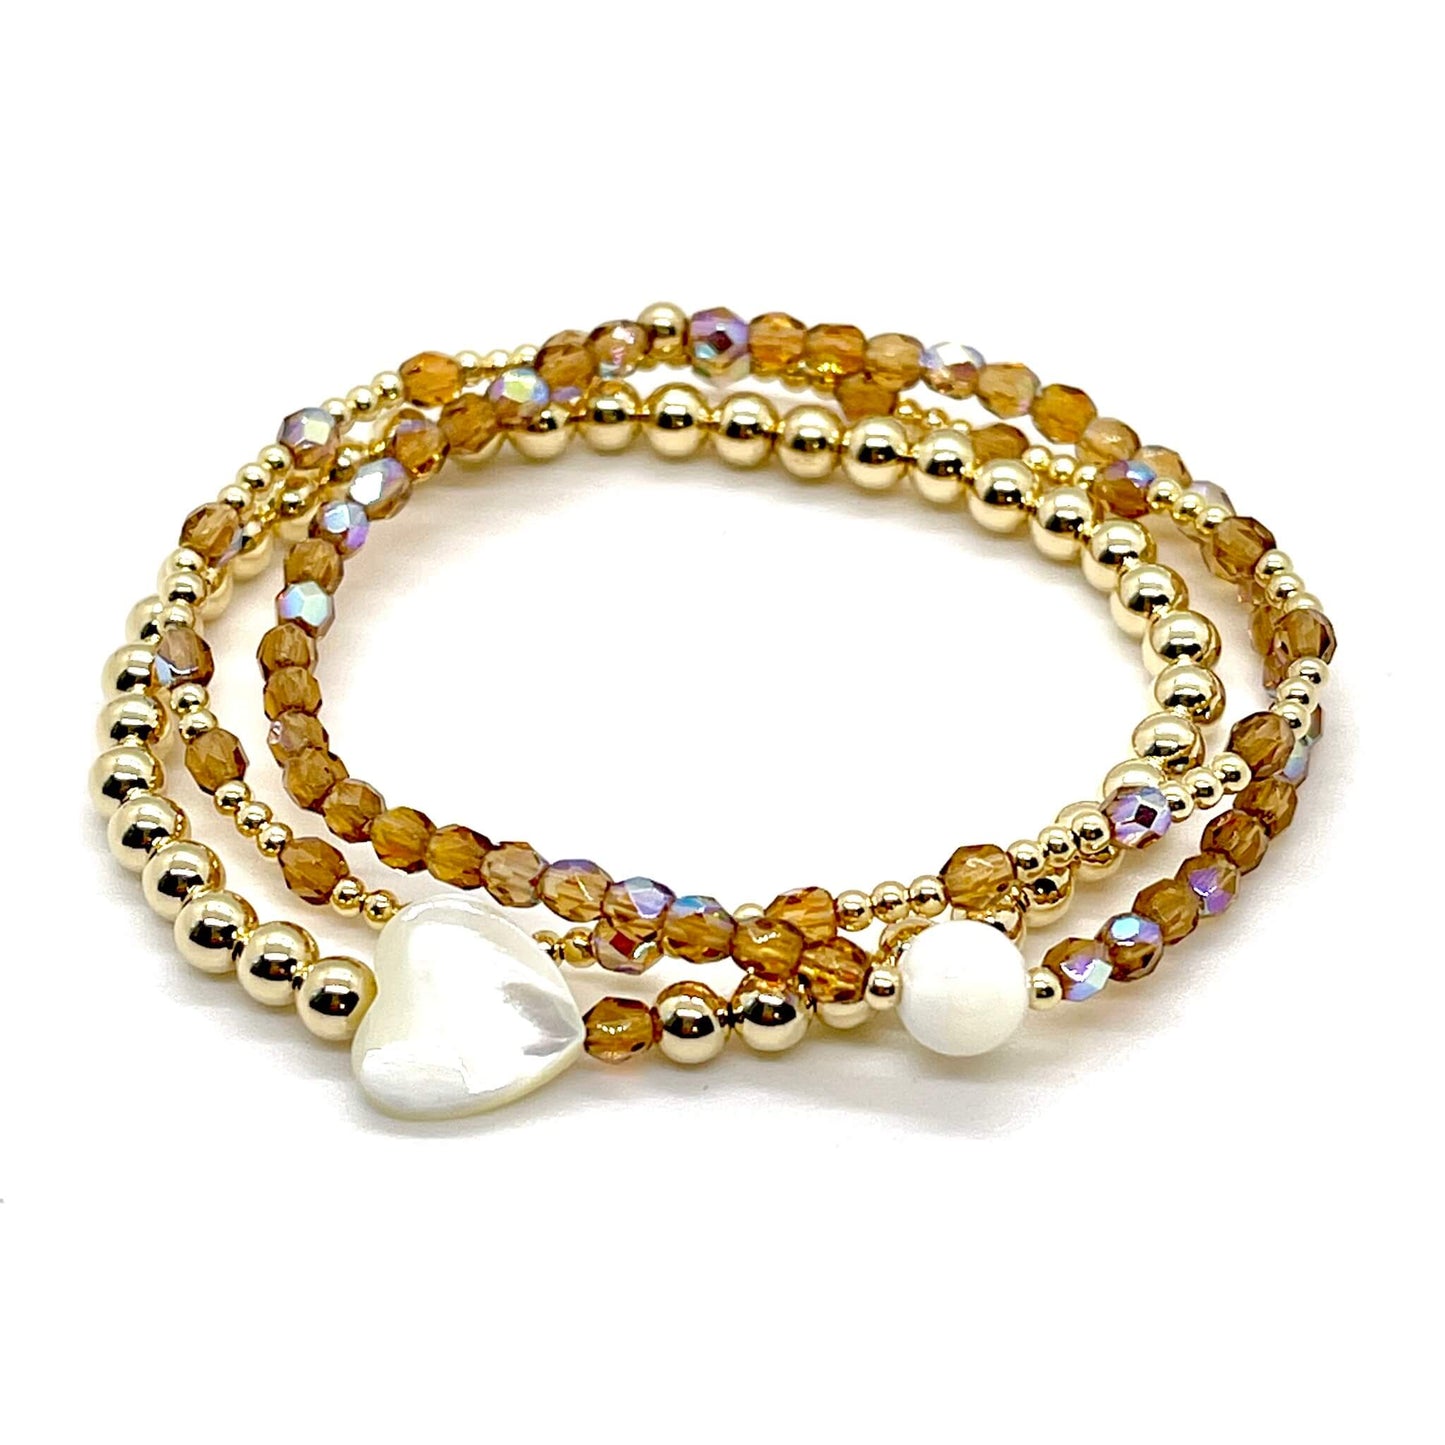 Bridesmaid bracelet gift. Amber crystals, 14K gold filled beads, and heart and round mother-of-pearl beads on elastic stretch cord.